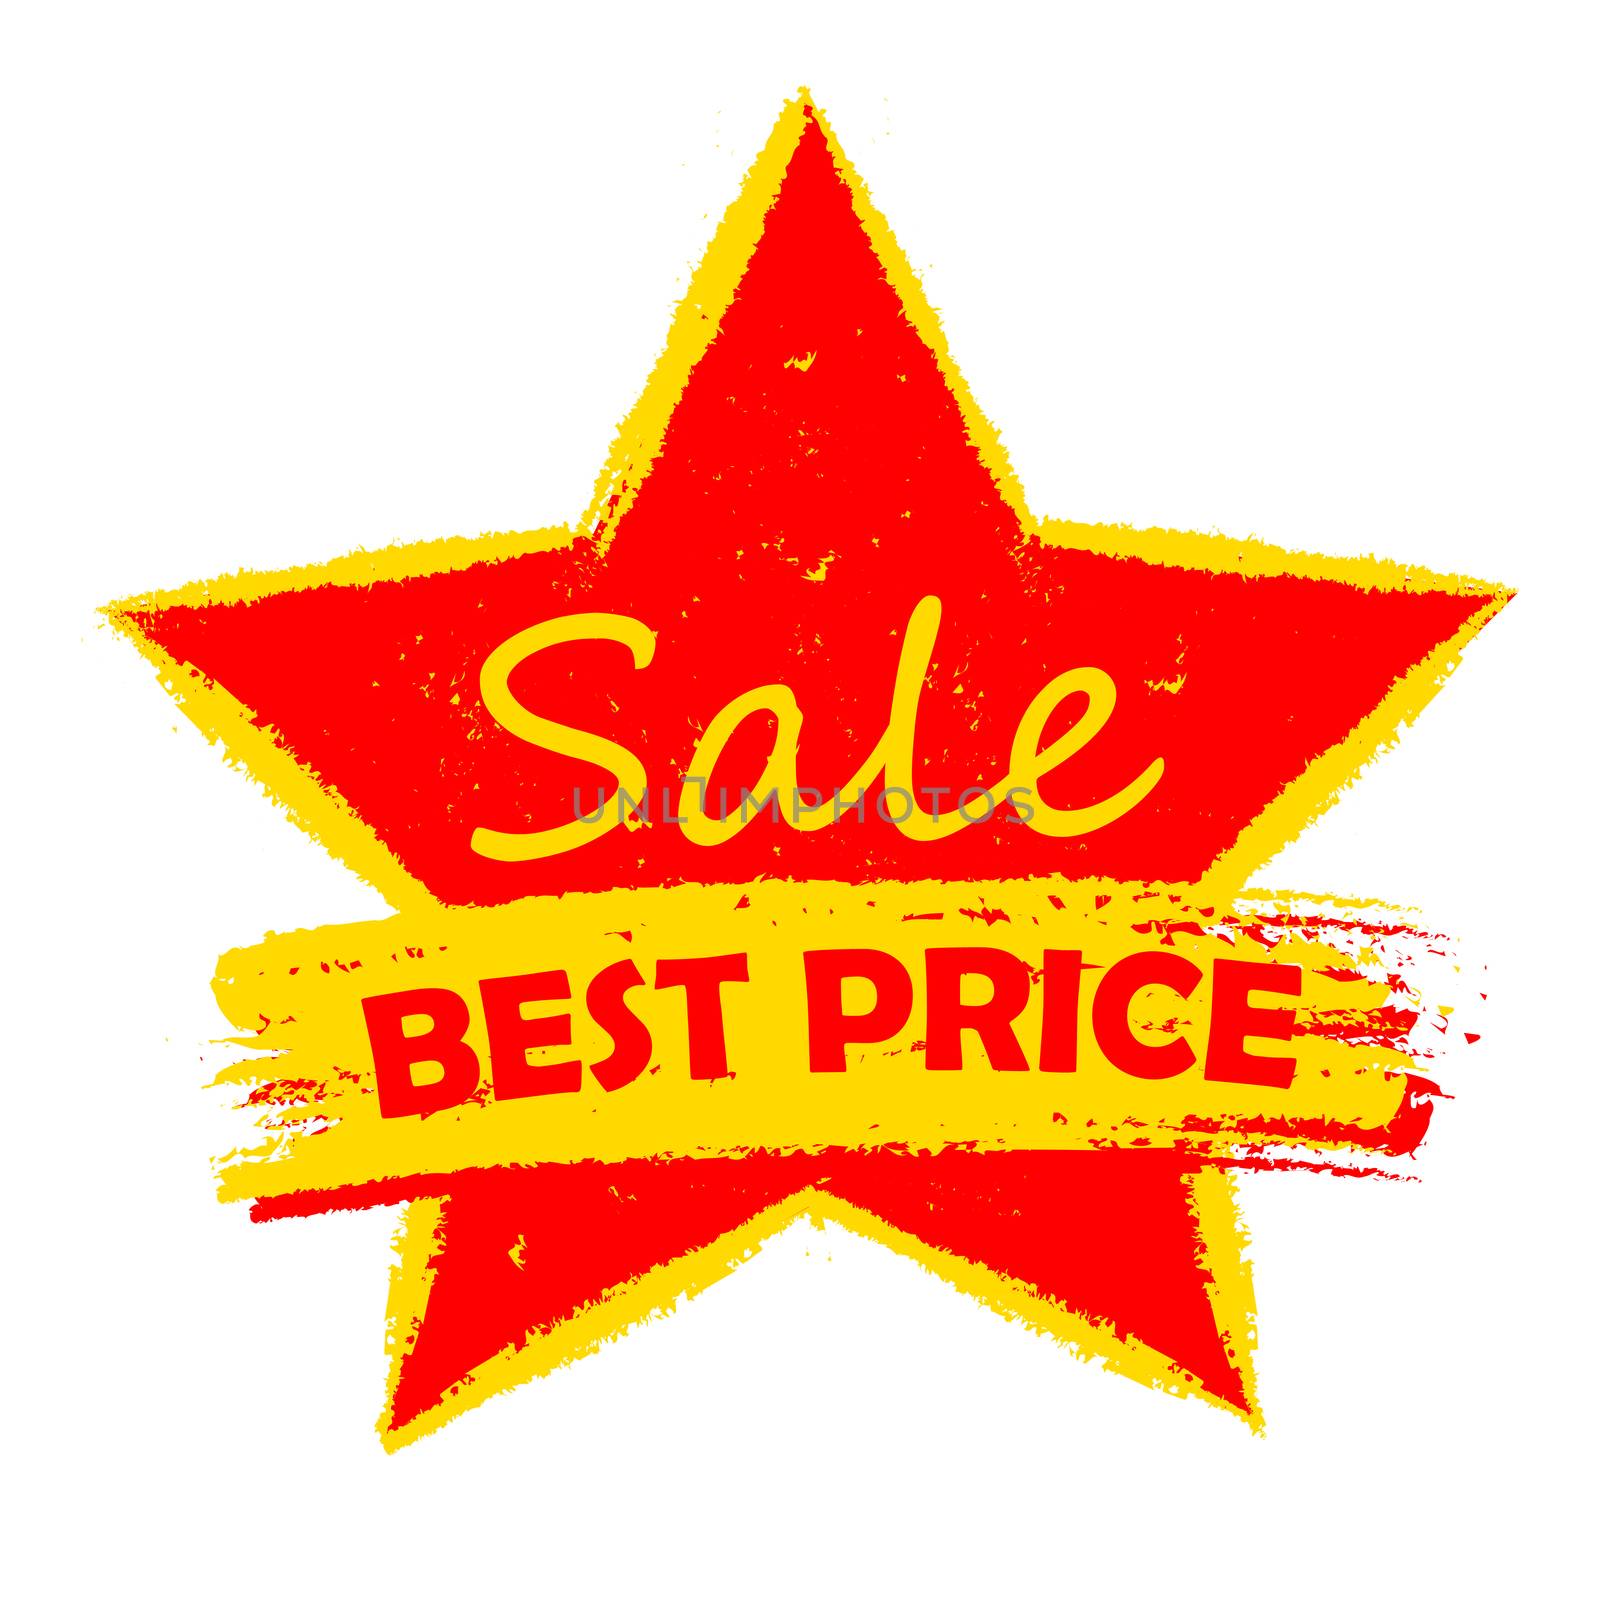 best price sale in star, yellow and red drawn label by marinini